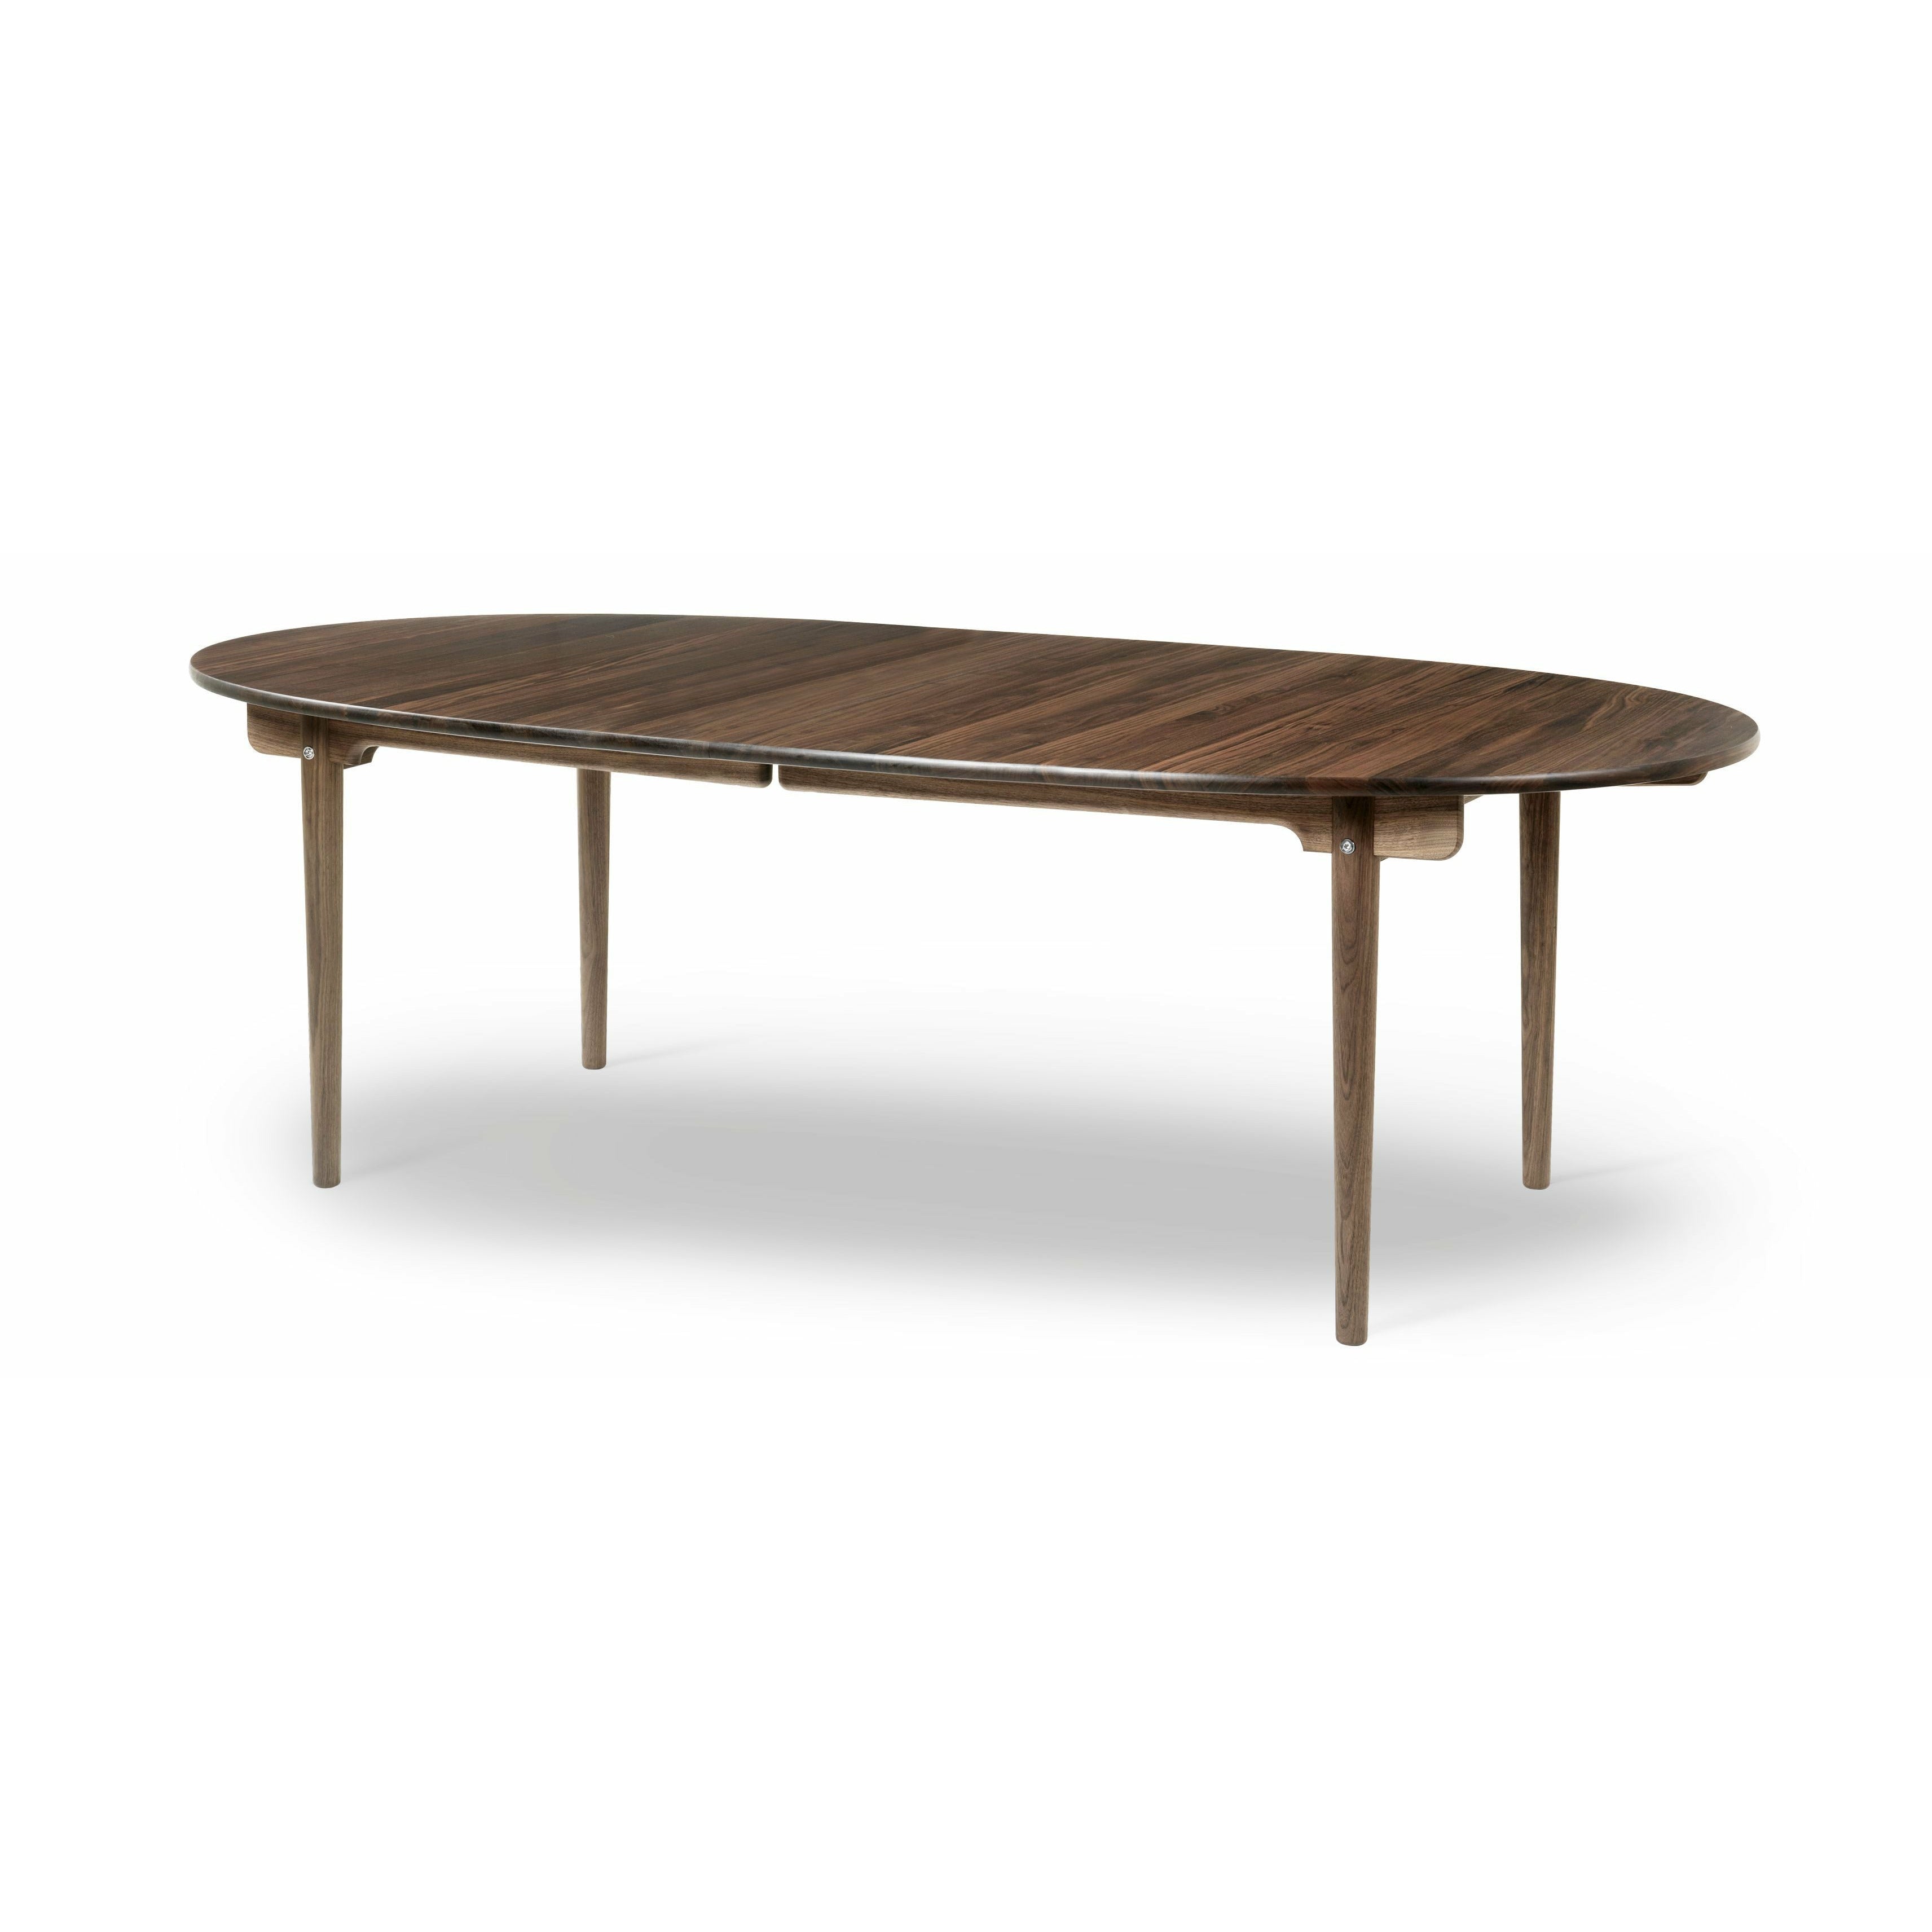 Carl Hansen Ch339 Dining Table Designed For 4 Pull Out Plates, Walnut Oiled